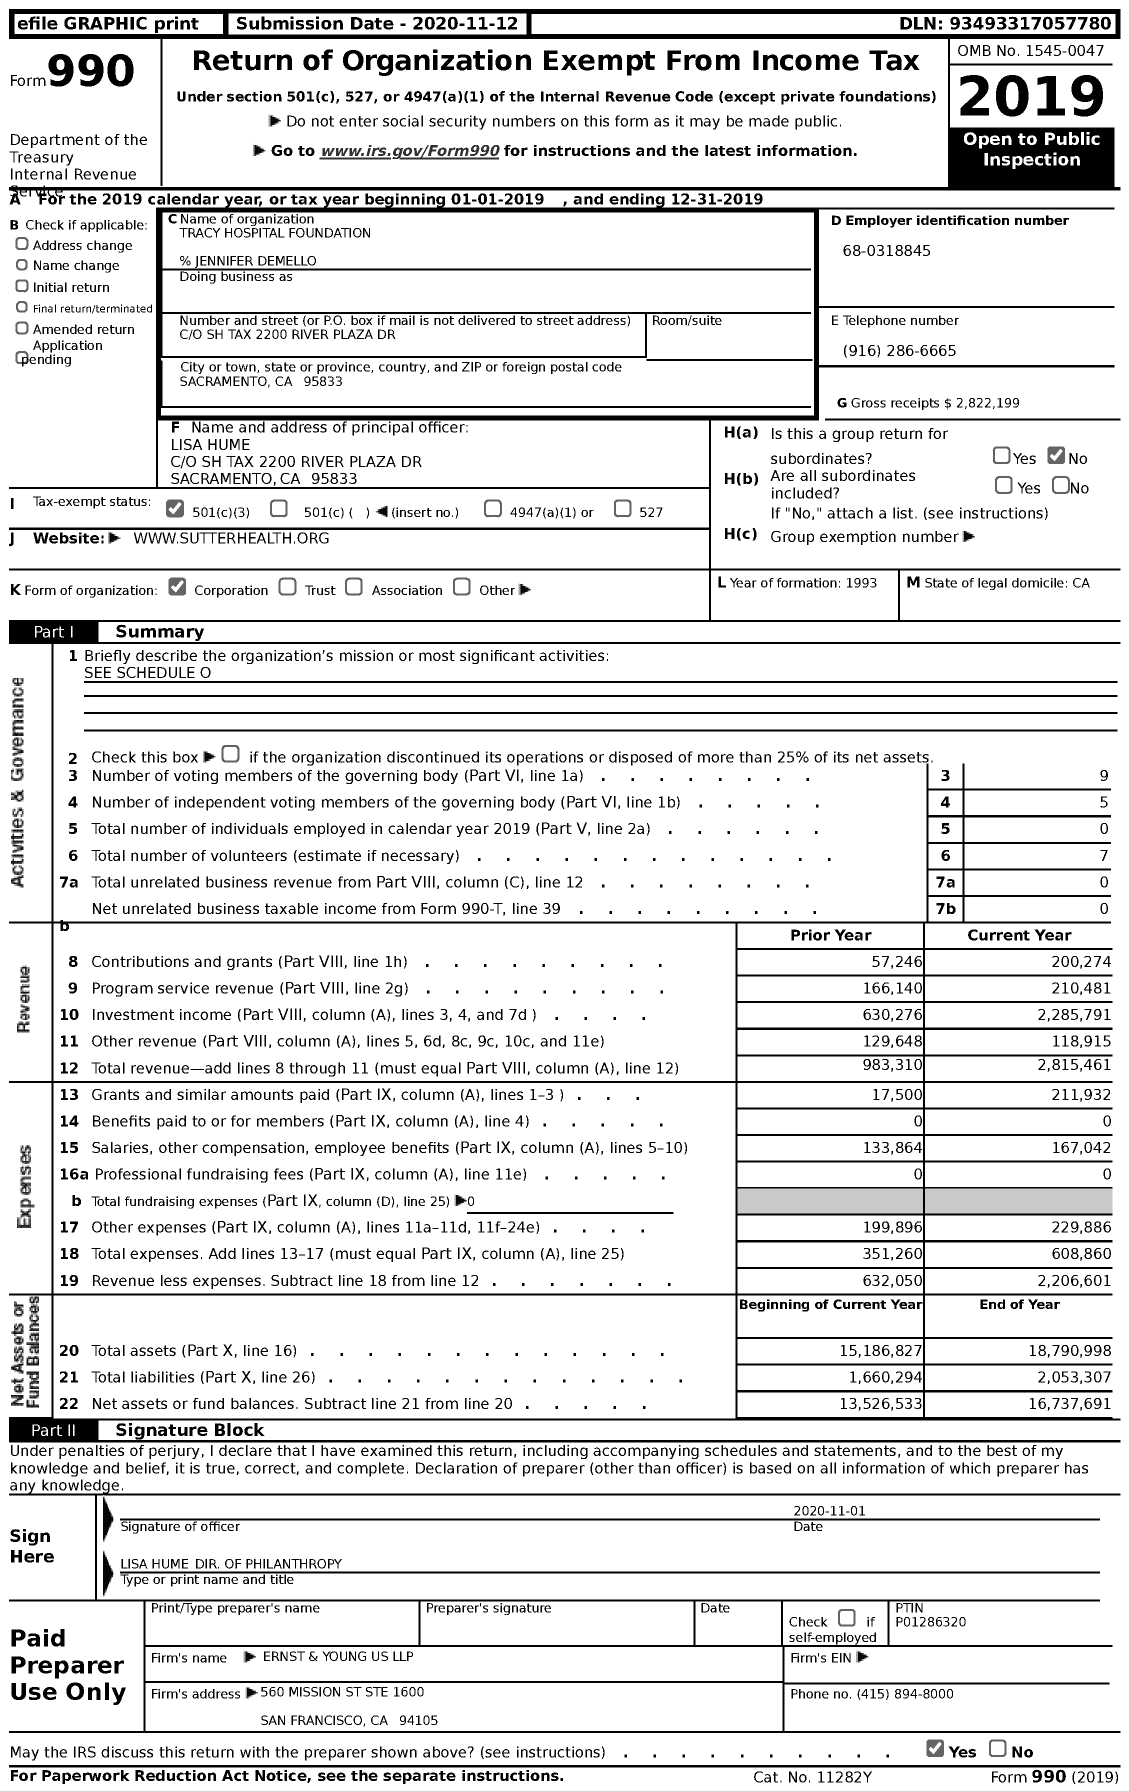 Image of first page of 2019 Form 990 for Tracy Hospital Foundation